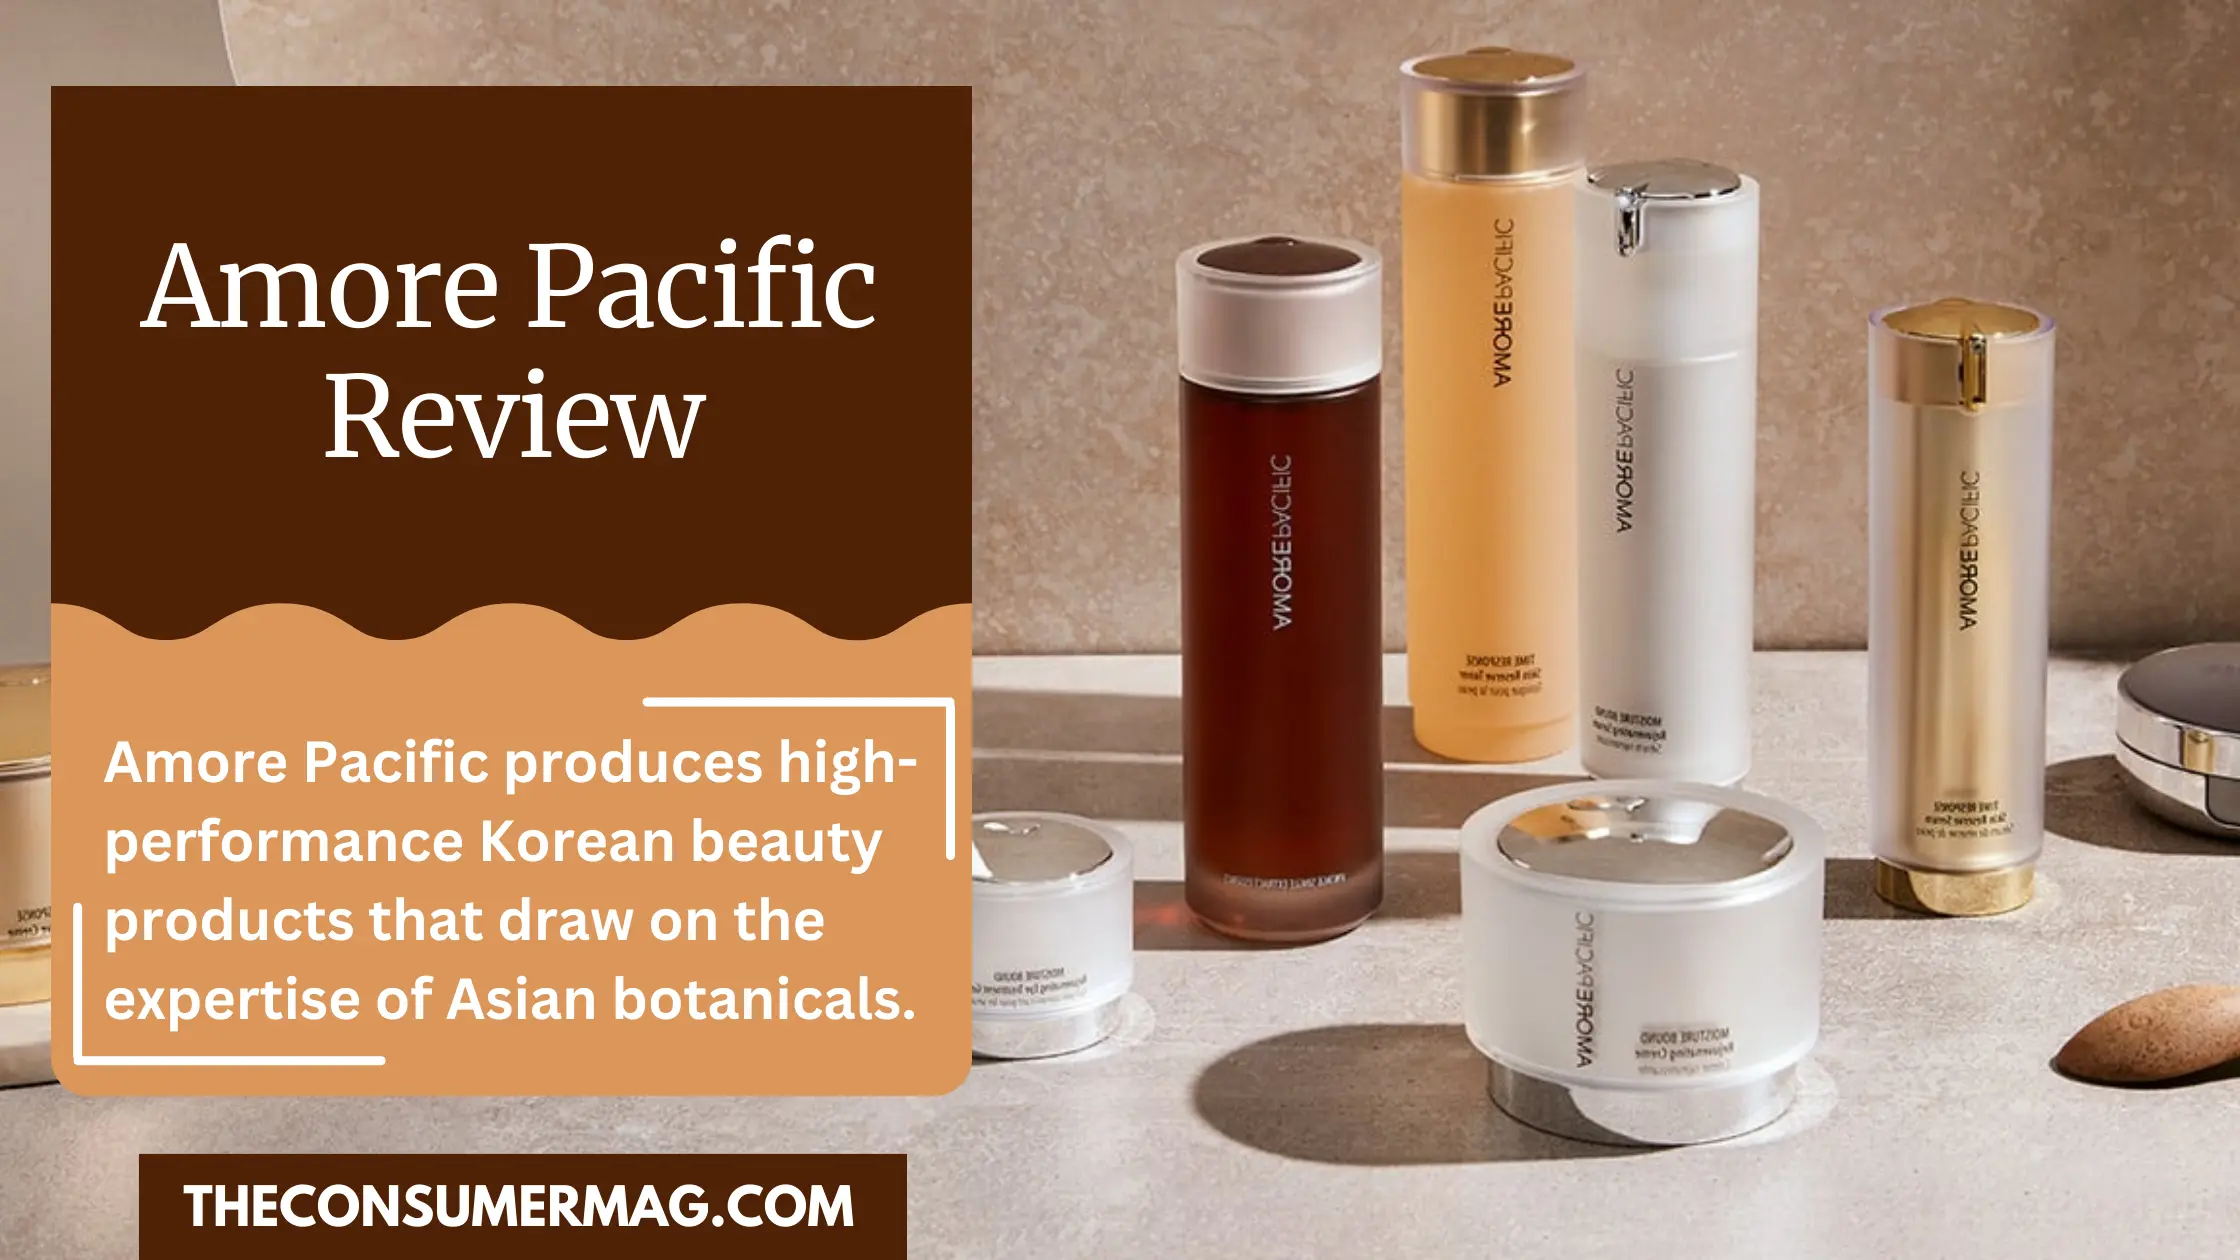 Amore Pacific Review: Find Your New Favorite Korean Beauty Products